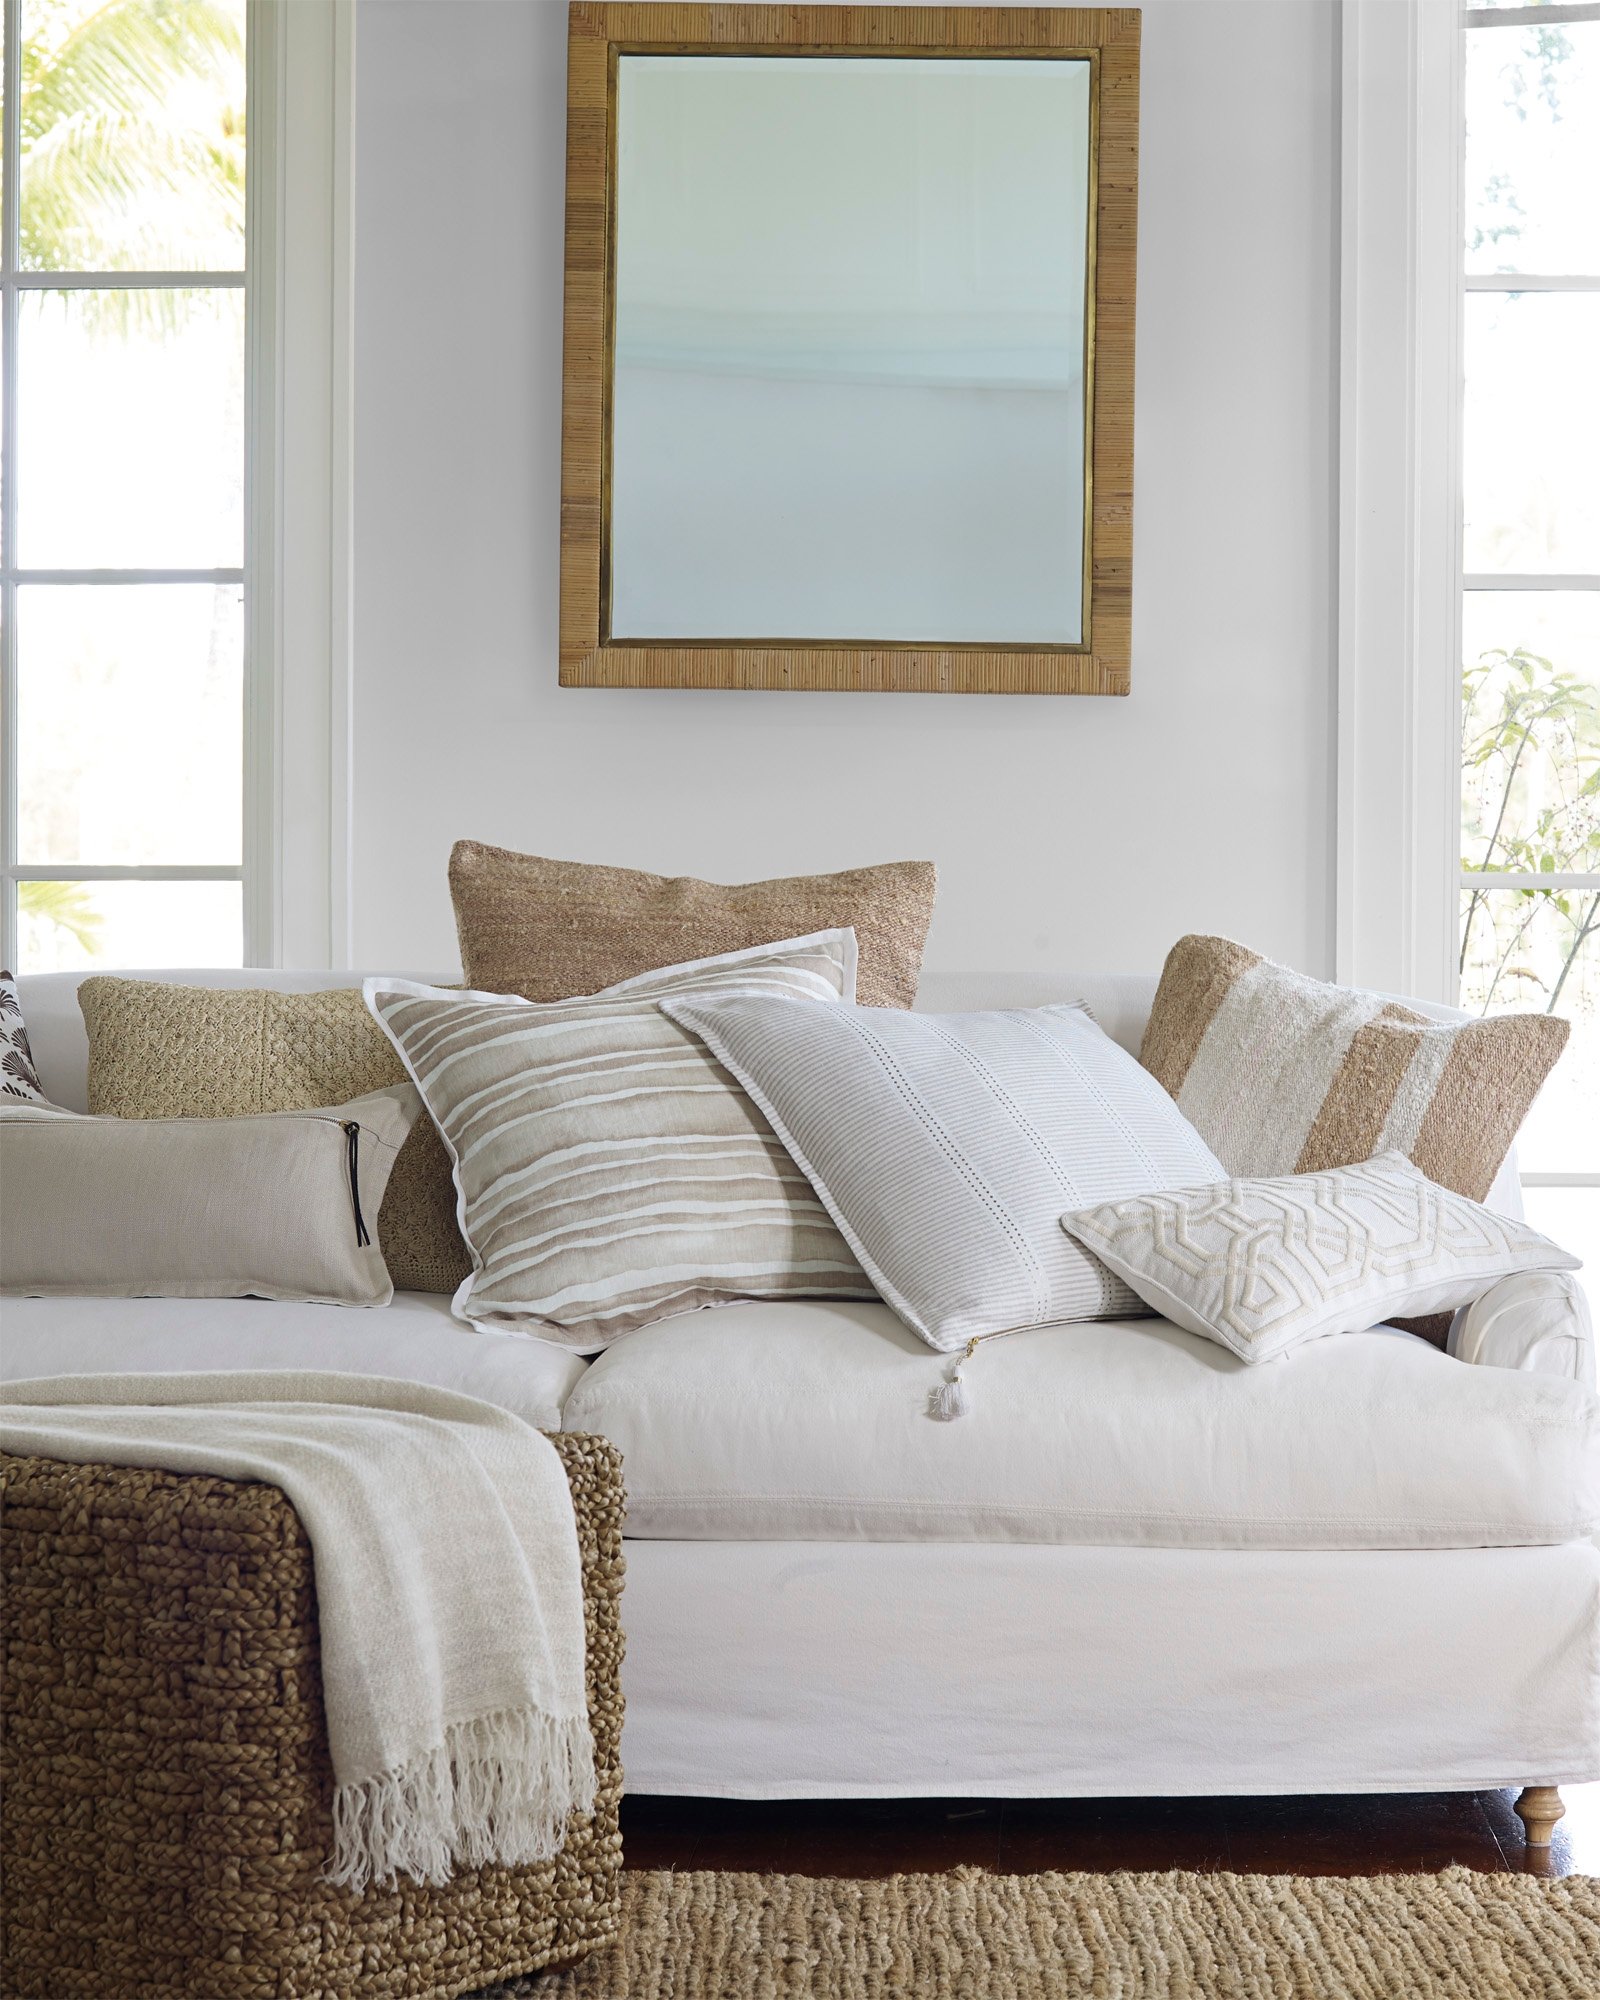 Jetty Pillow Cover - Ivory - Insert sold separately - Image 2